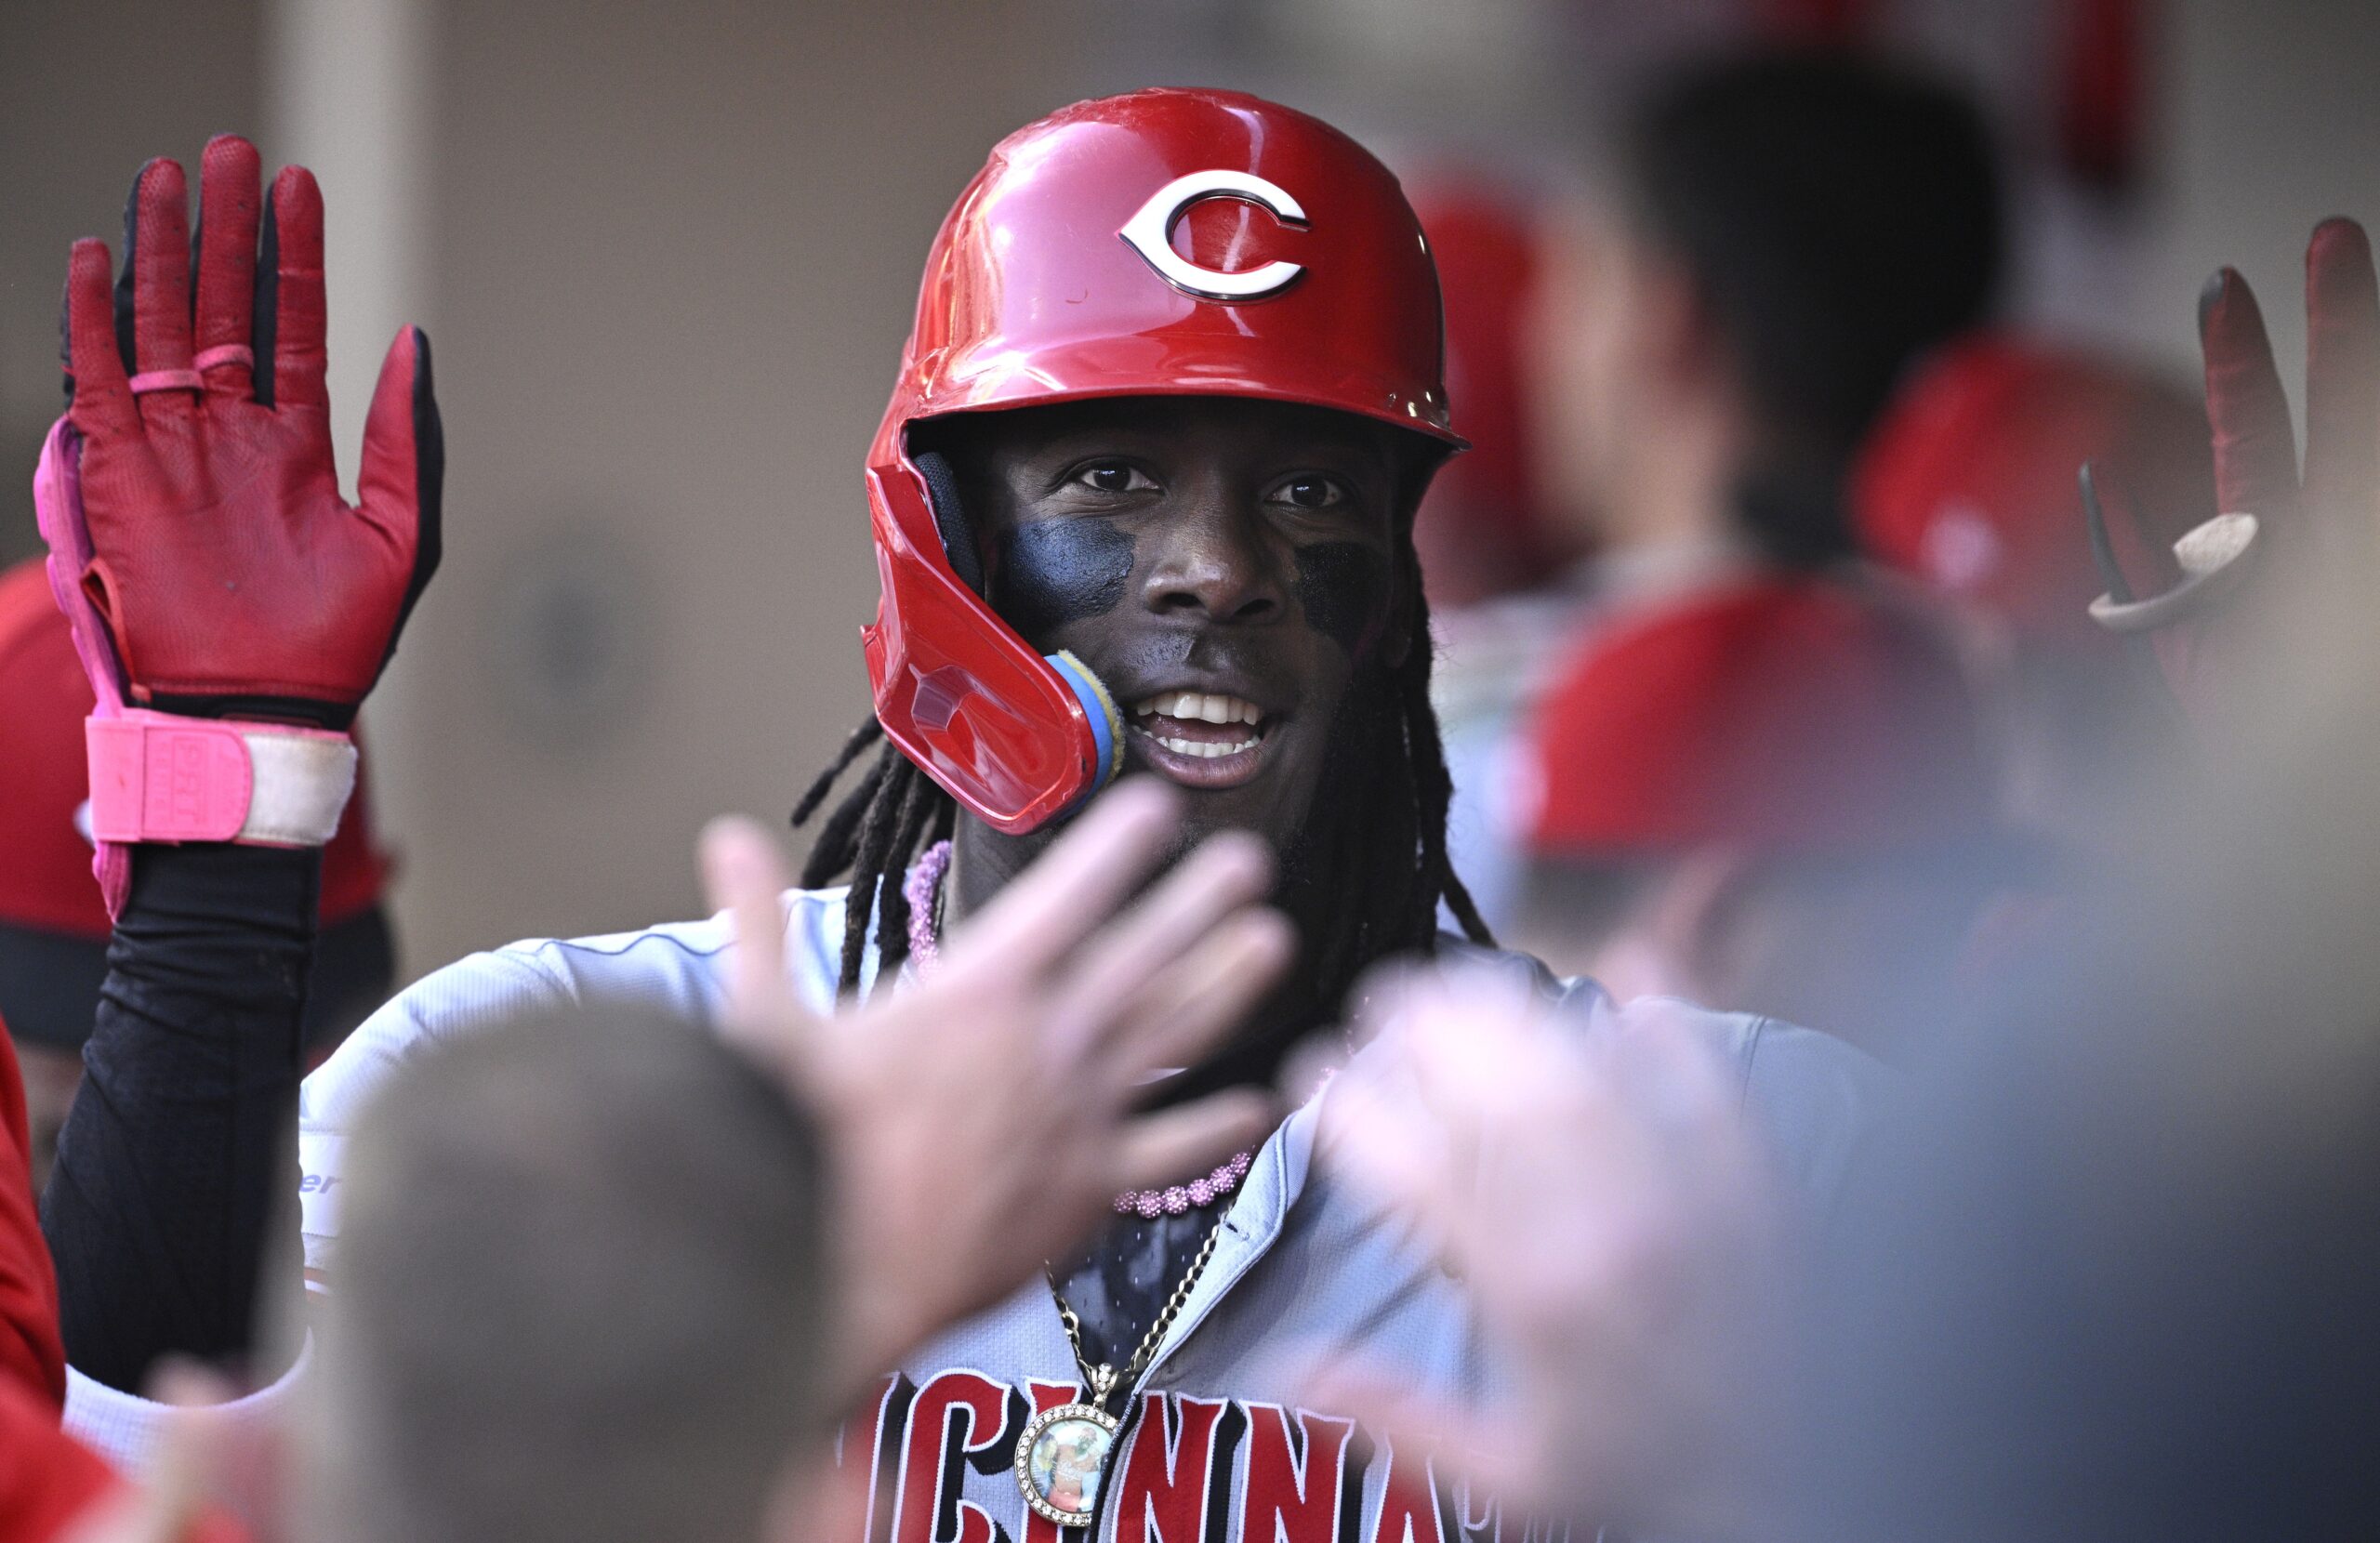 Reds Player Makes MLB History in San Diego